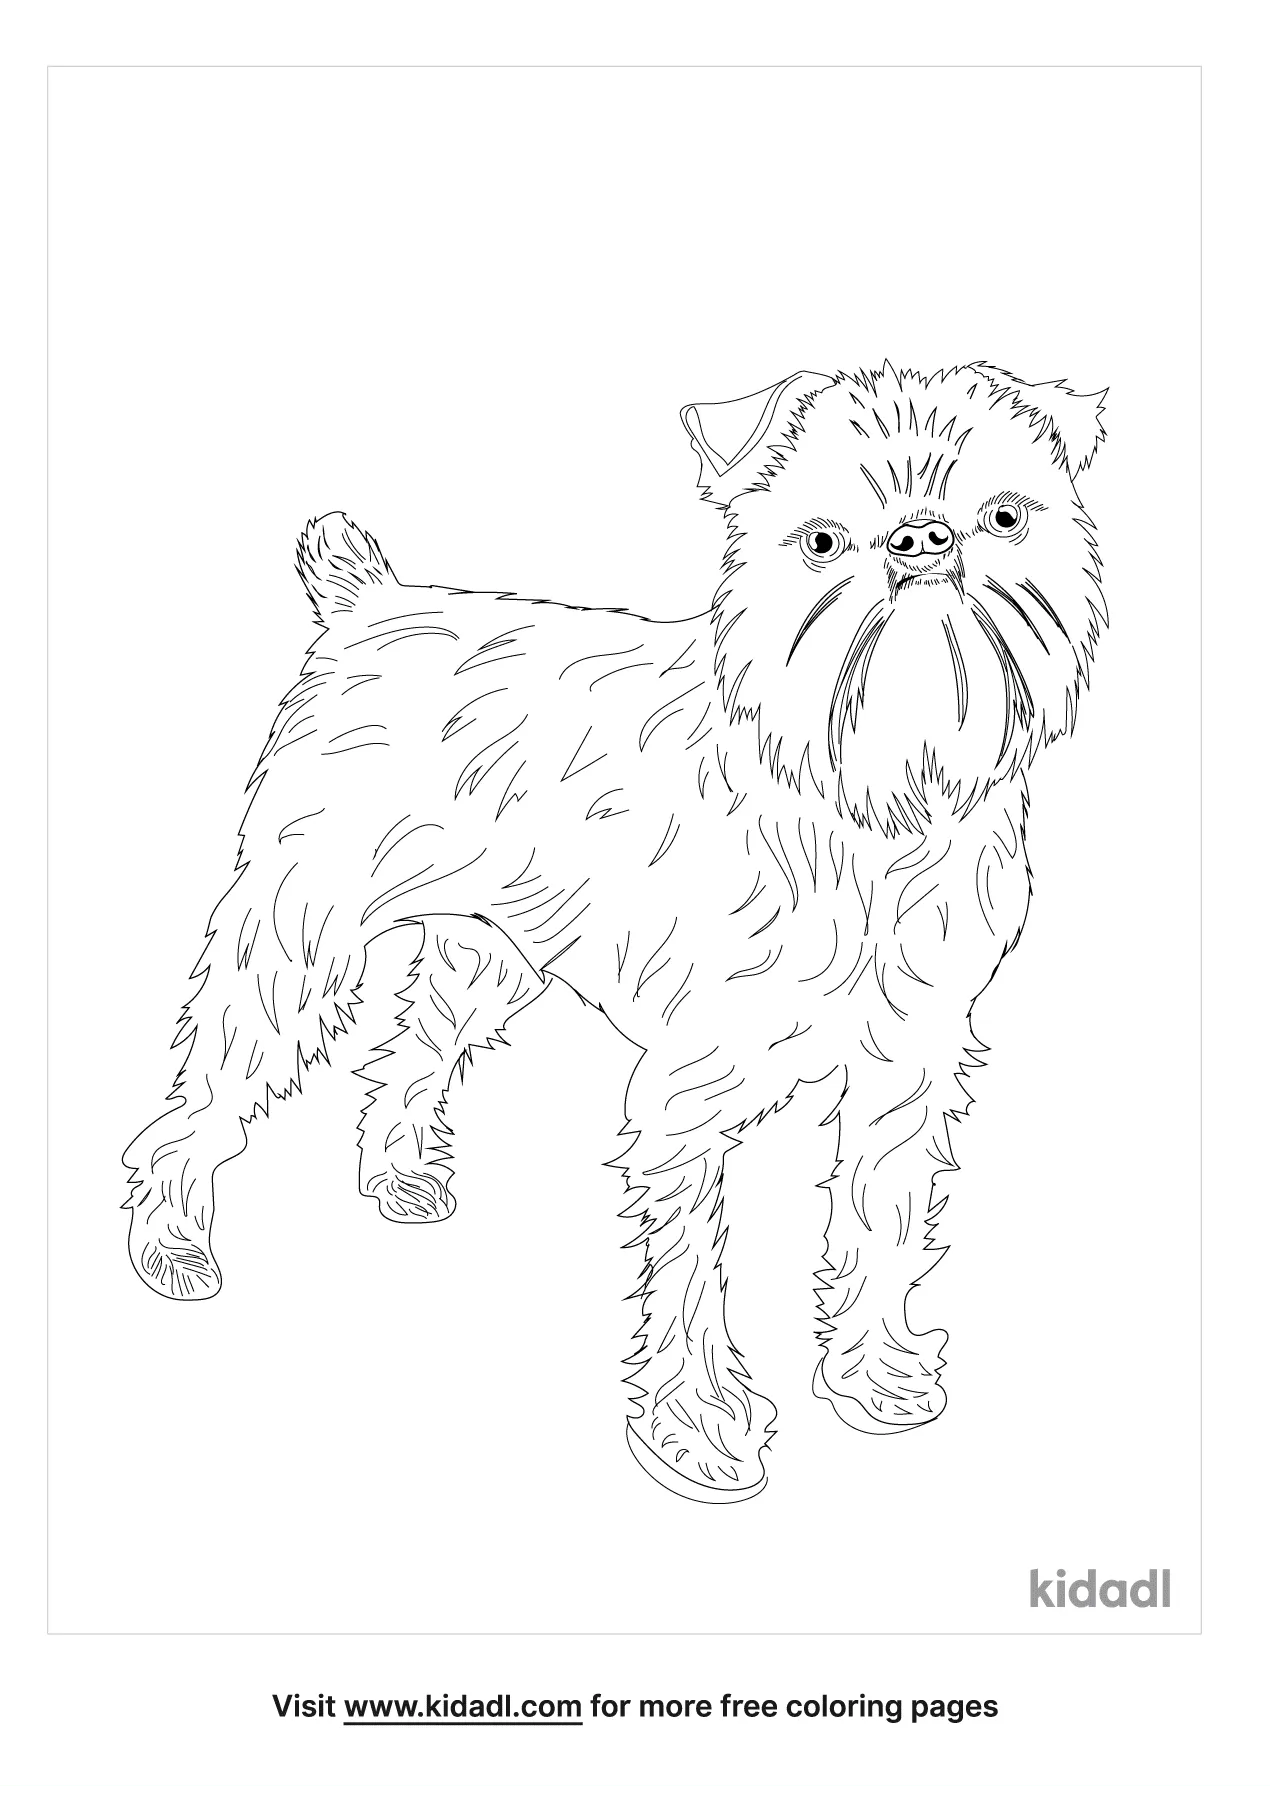 Brussels Griffon Coloring Page